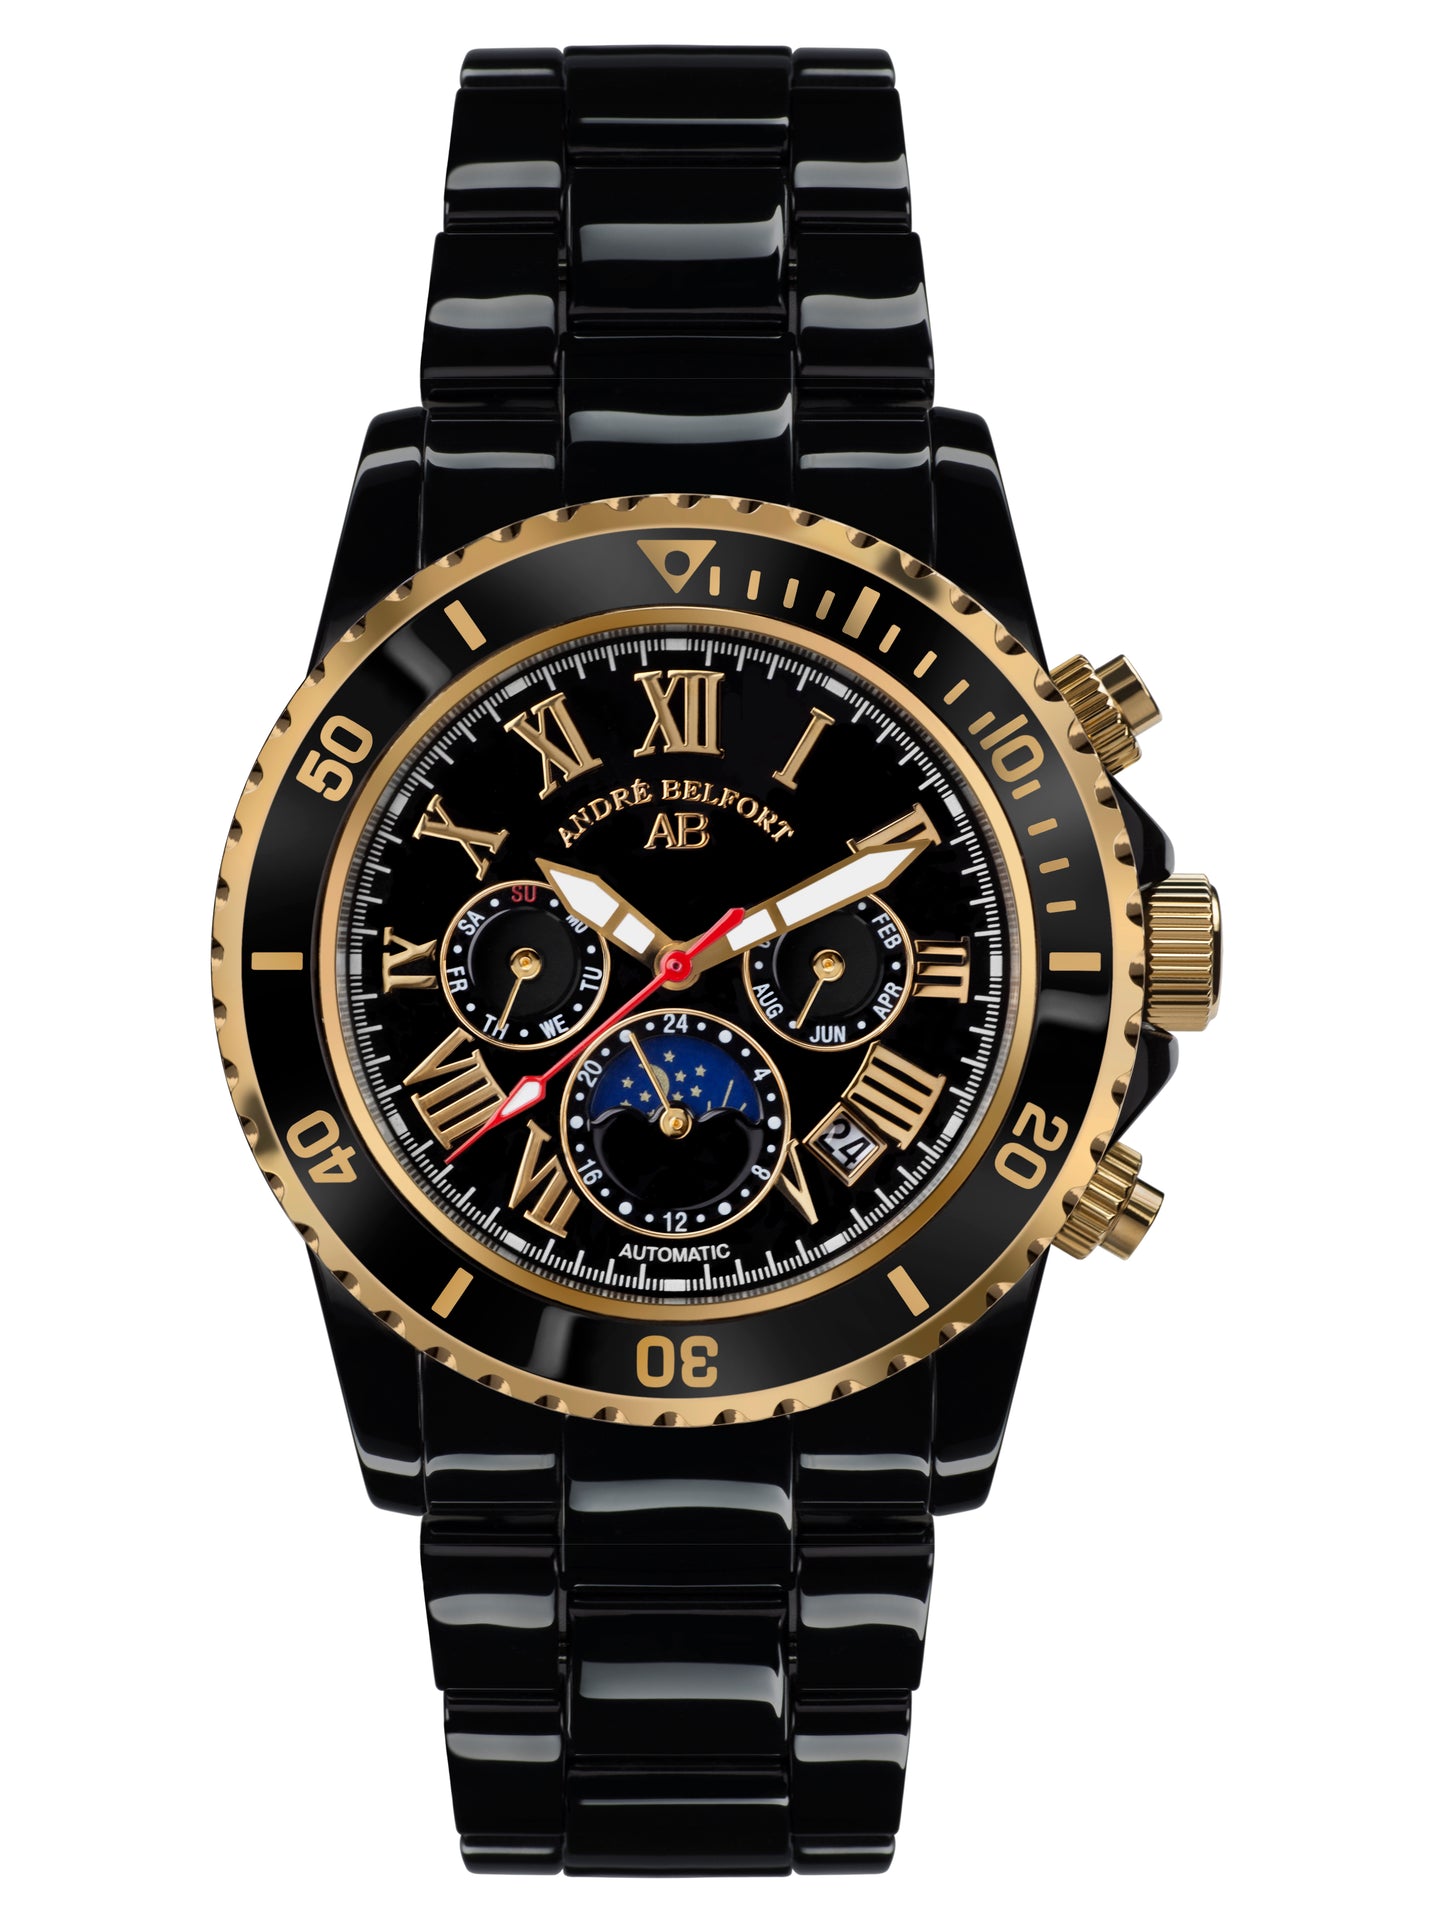 Automatic watches — Sirène — André Belfort — gold black